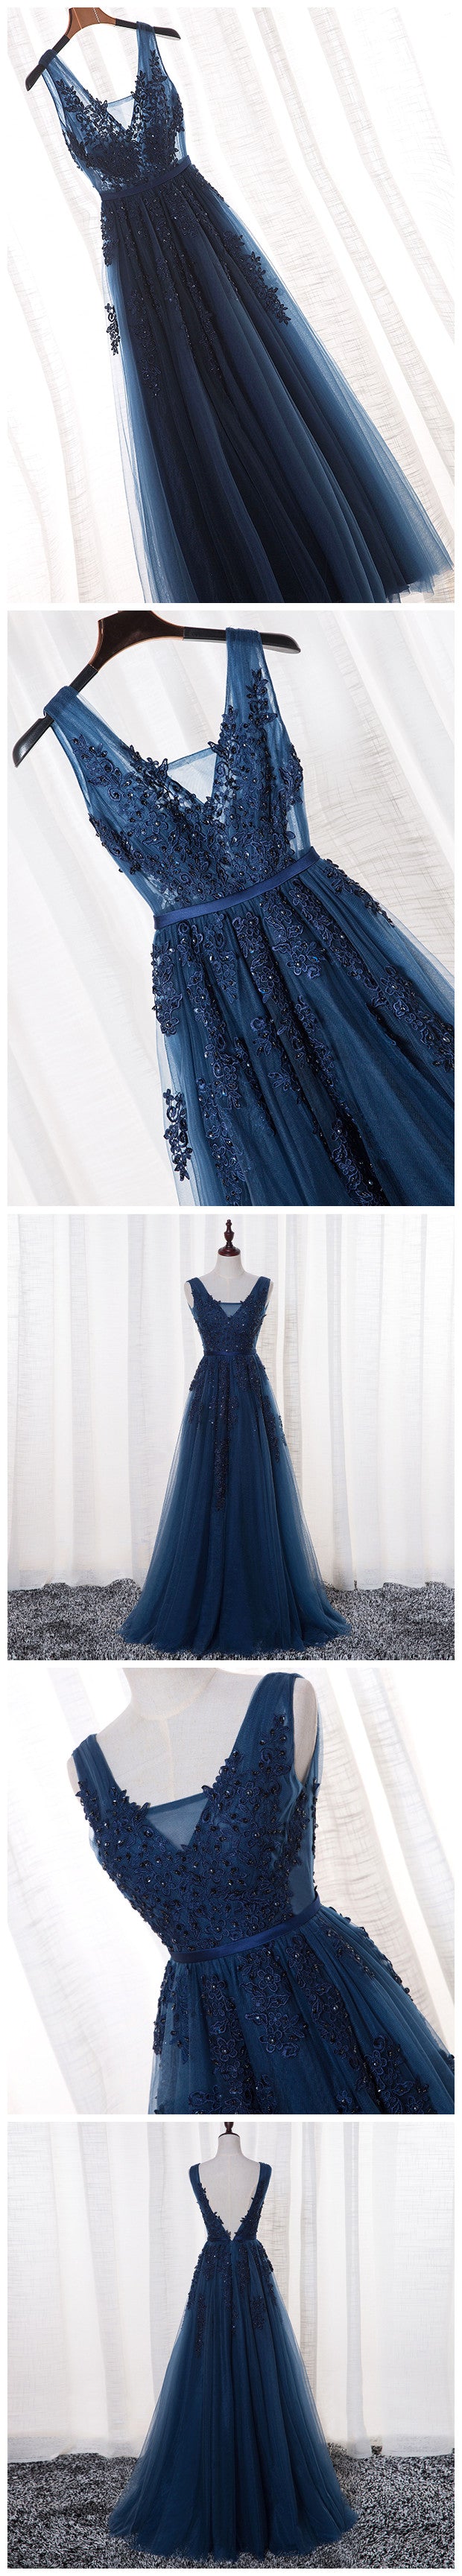 Glamorous Navy Blue Lace Tulle V Neck See Through Prom Dress #110507-Dolly Gown